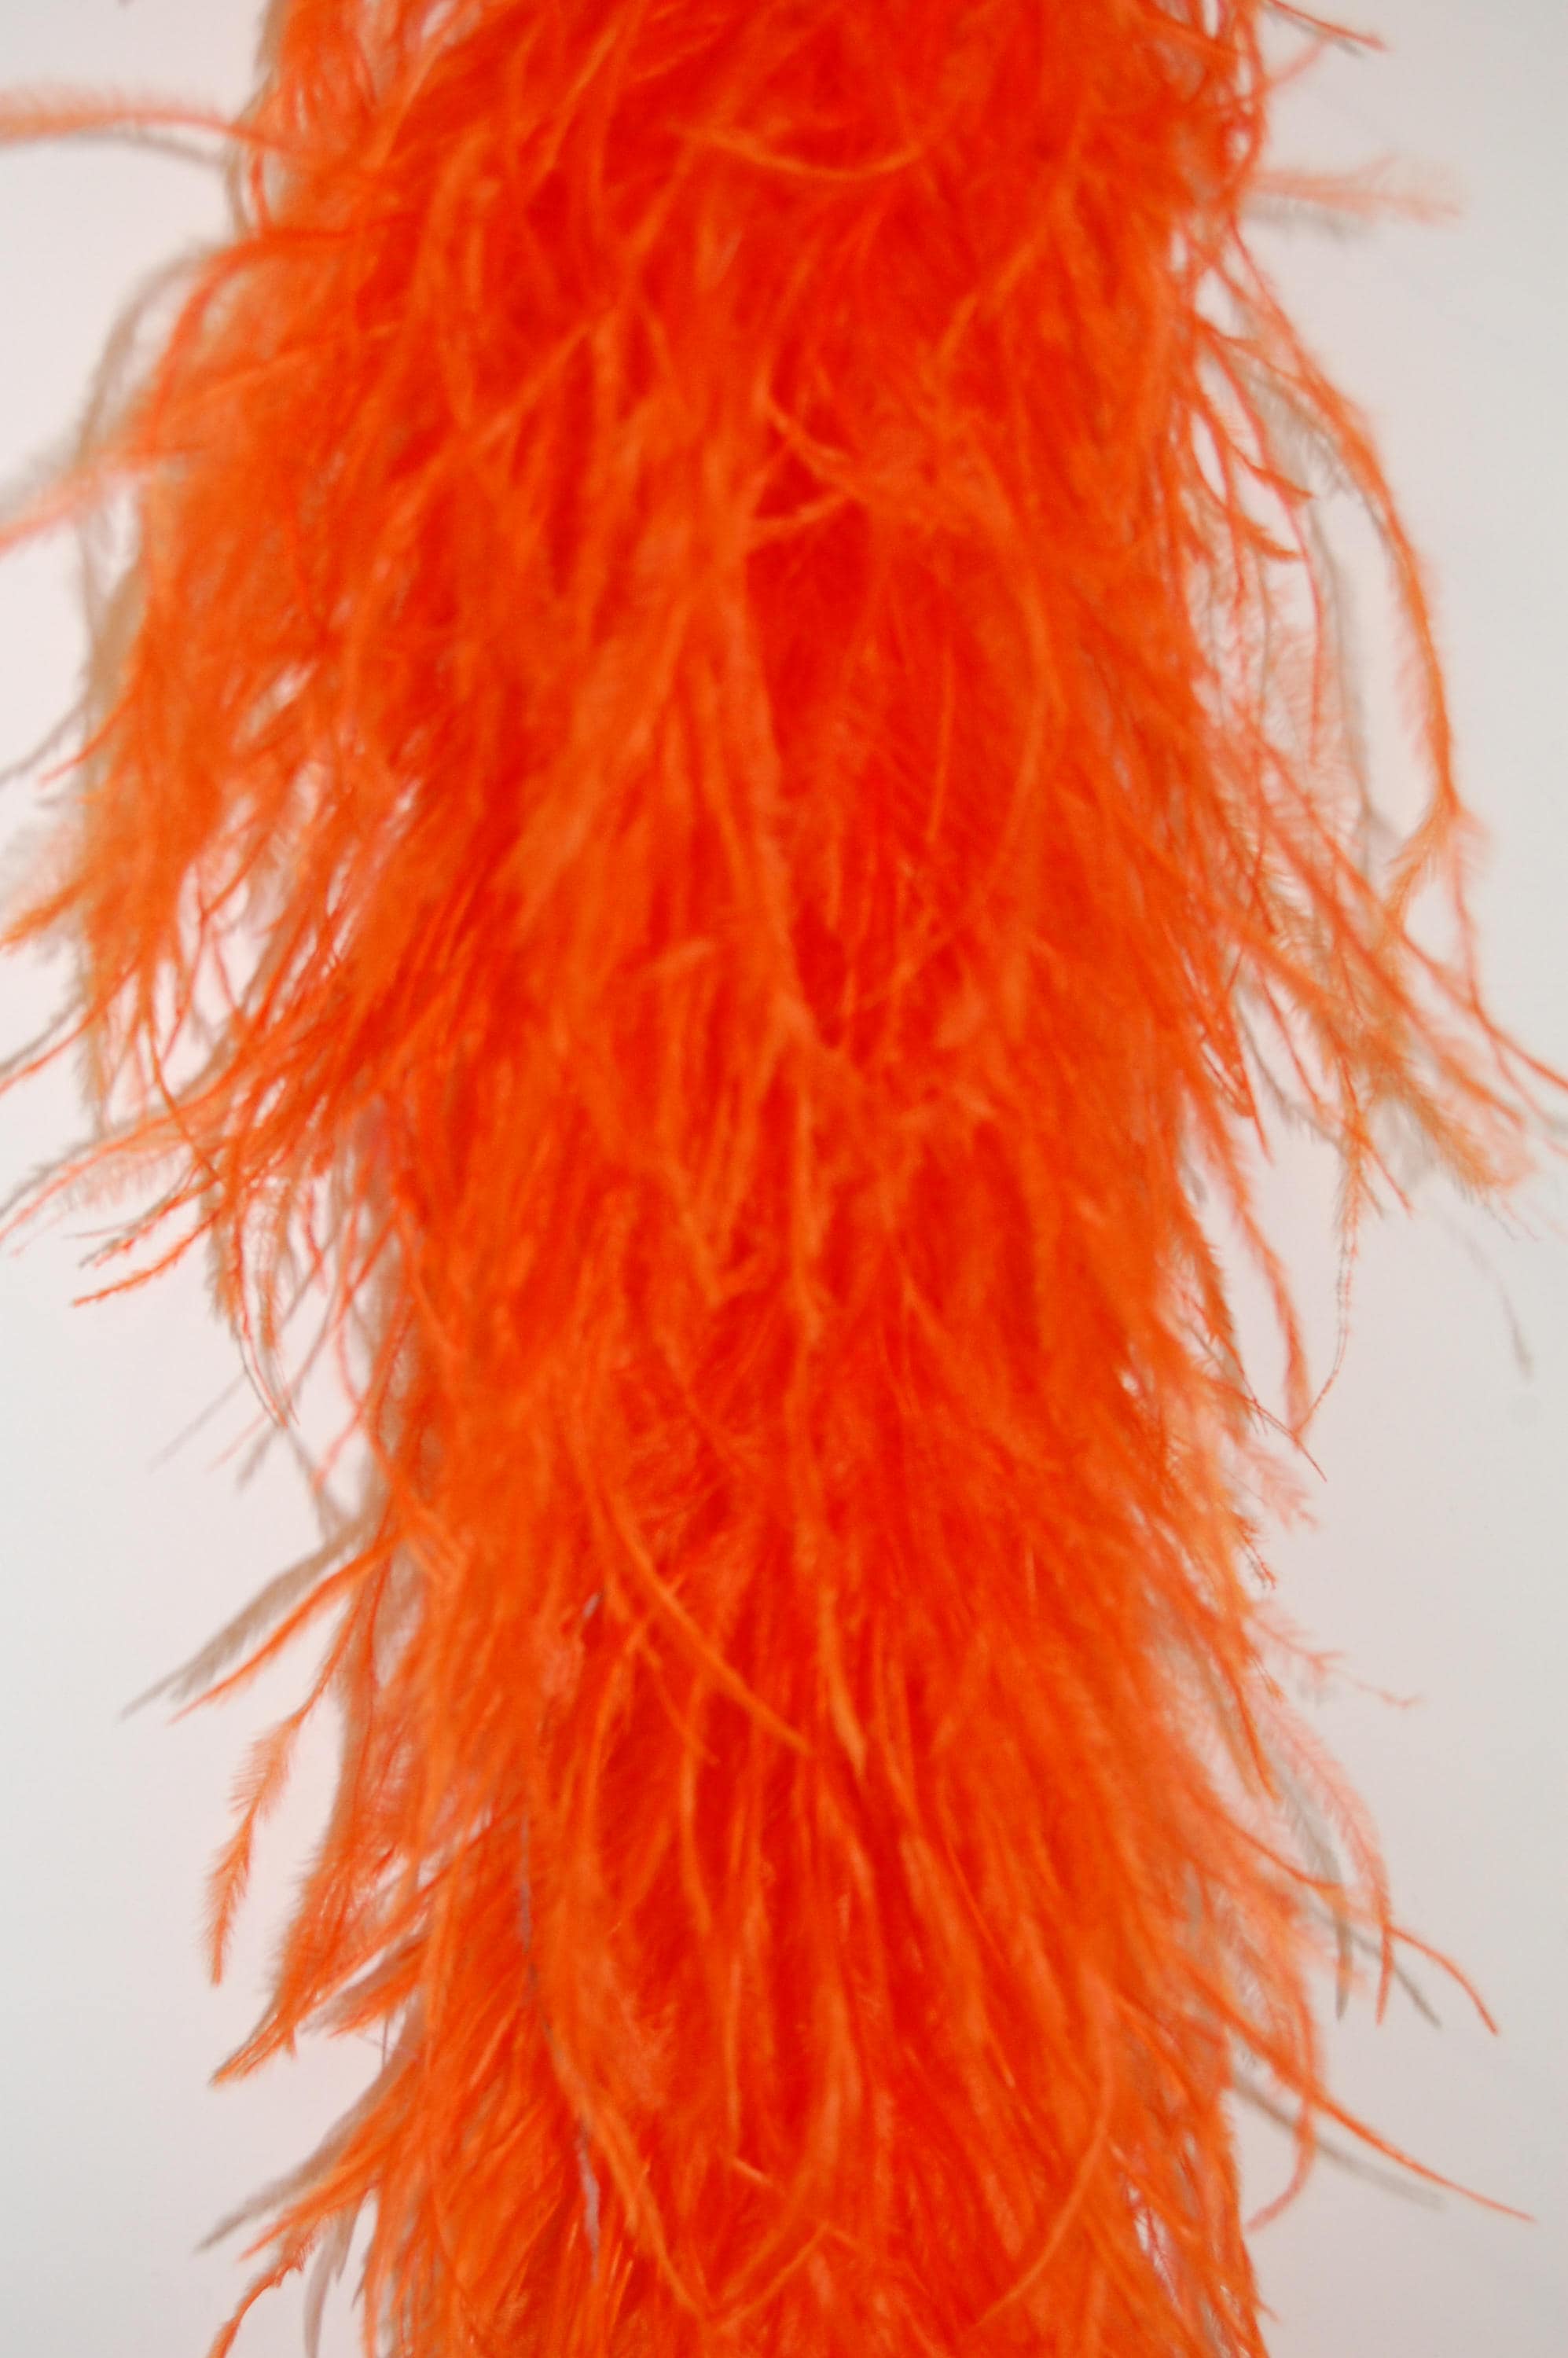 Larryhot Orange Boa Feathers for Party - 45g 2 Yards Feather Boas for Adults,Wedding,Concert,Christmas Tree and Party Home Decoration(45g-Orange)